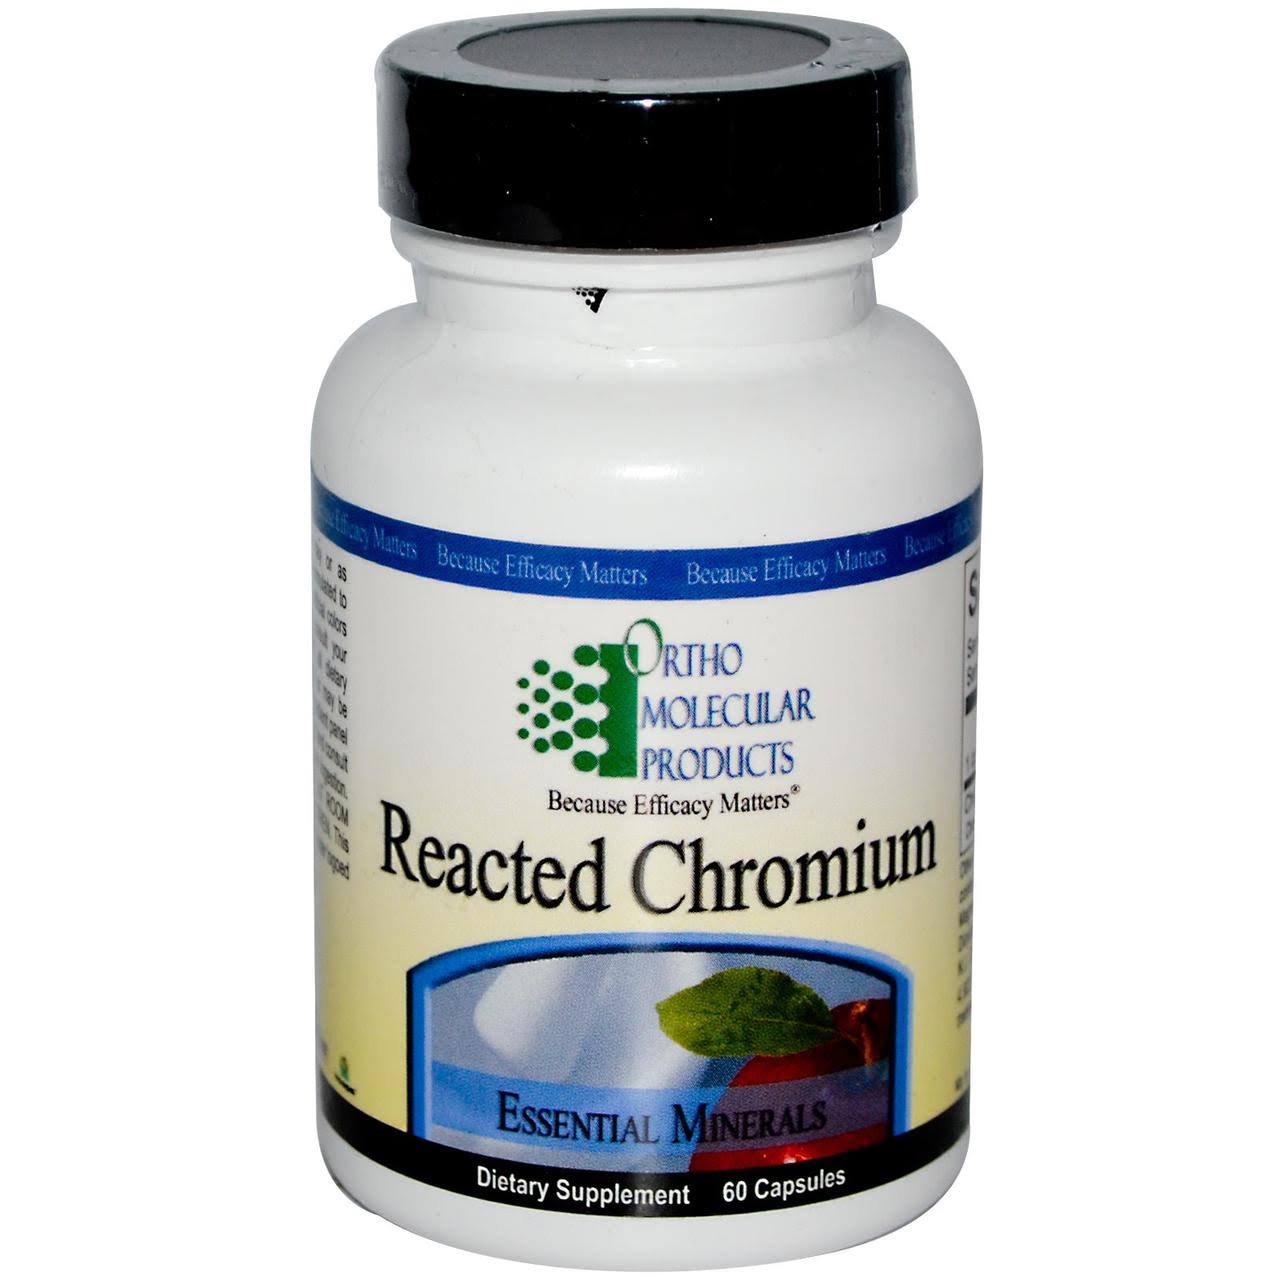 Ortho Molecular Product Reacted Chromium Dietary Supplement - 60ct